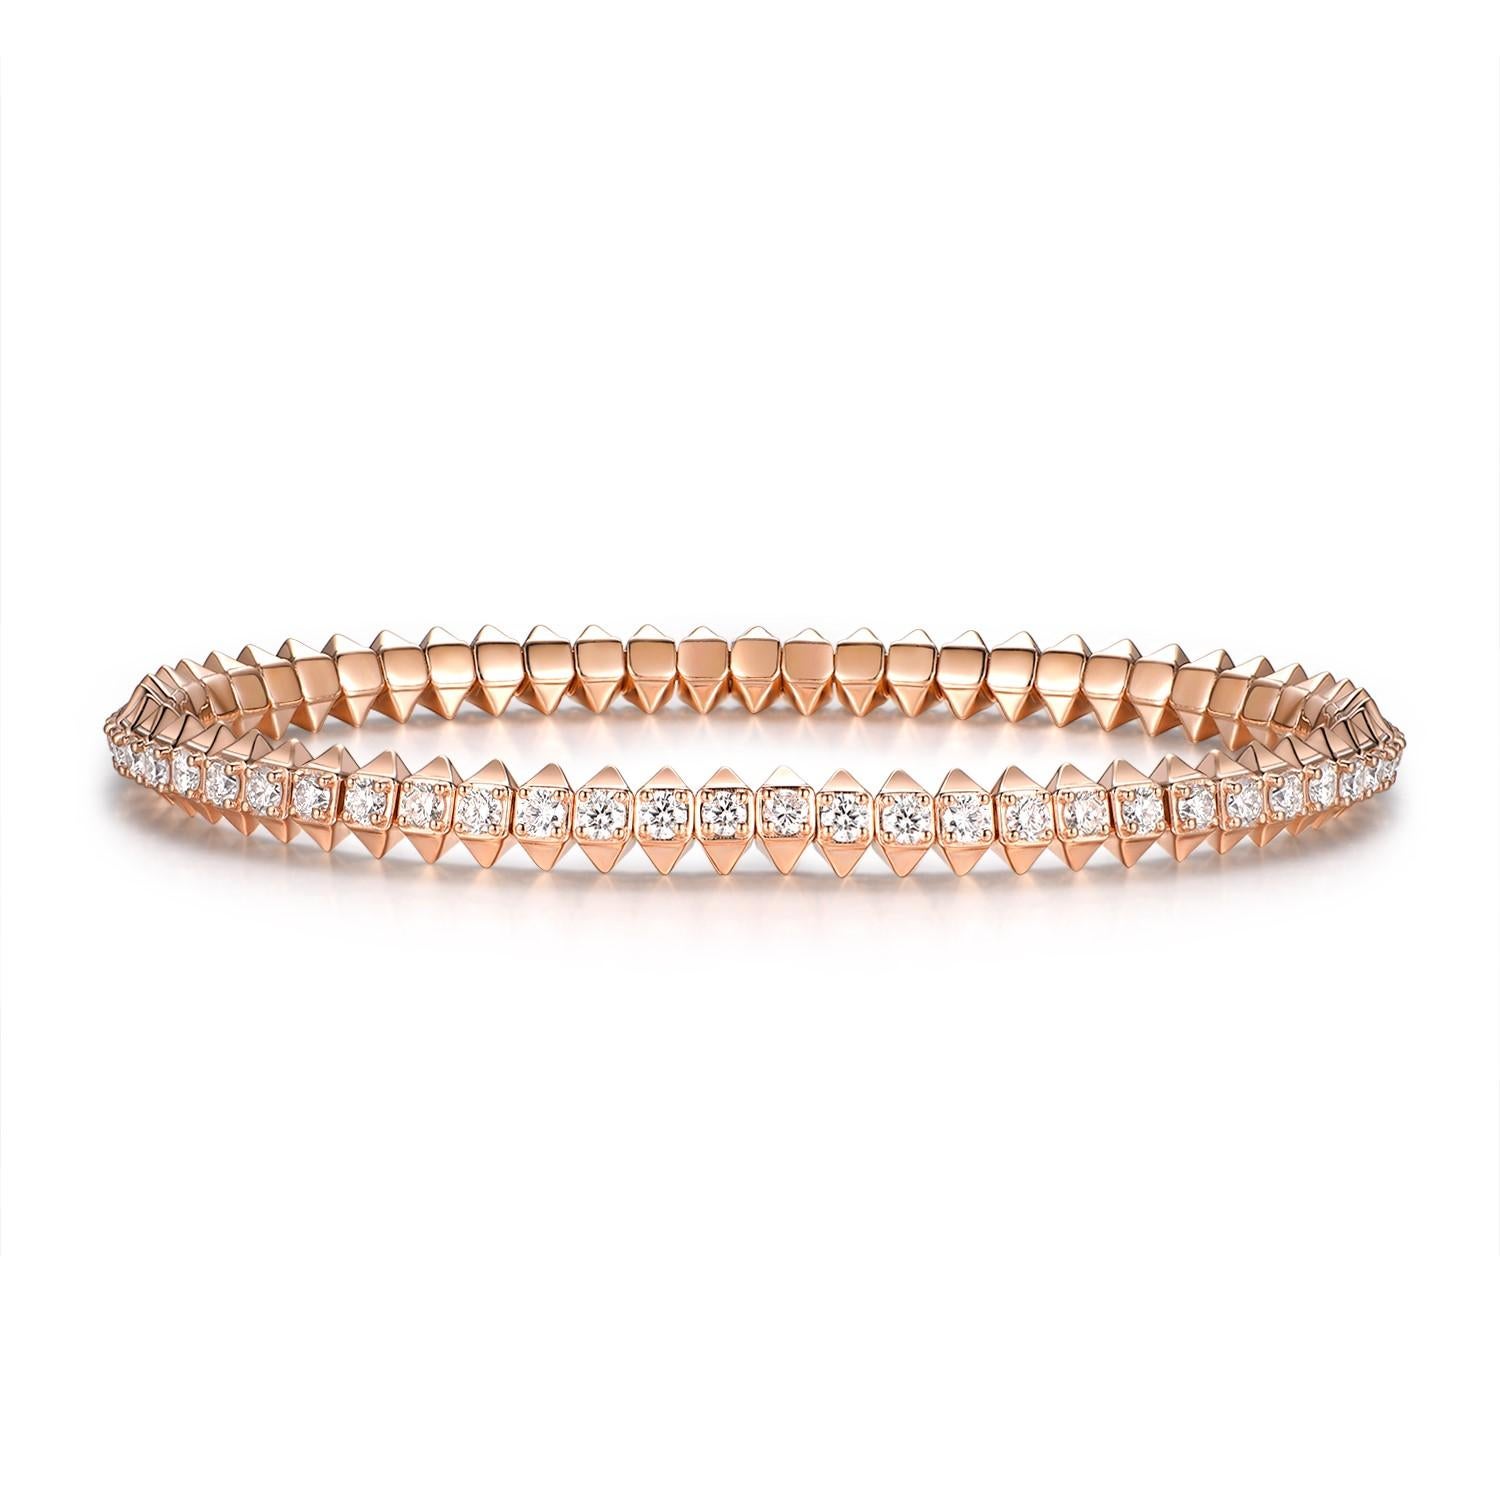 The 18 Karat Rose Gold 3.83 Carat Stretch Bangle is a stunning piece of jewelry that showcases the iconic clash motif design. Crafted in luxurious 18 karat rose gold, this bangle features a captivating combination of studded and polished